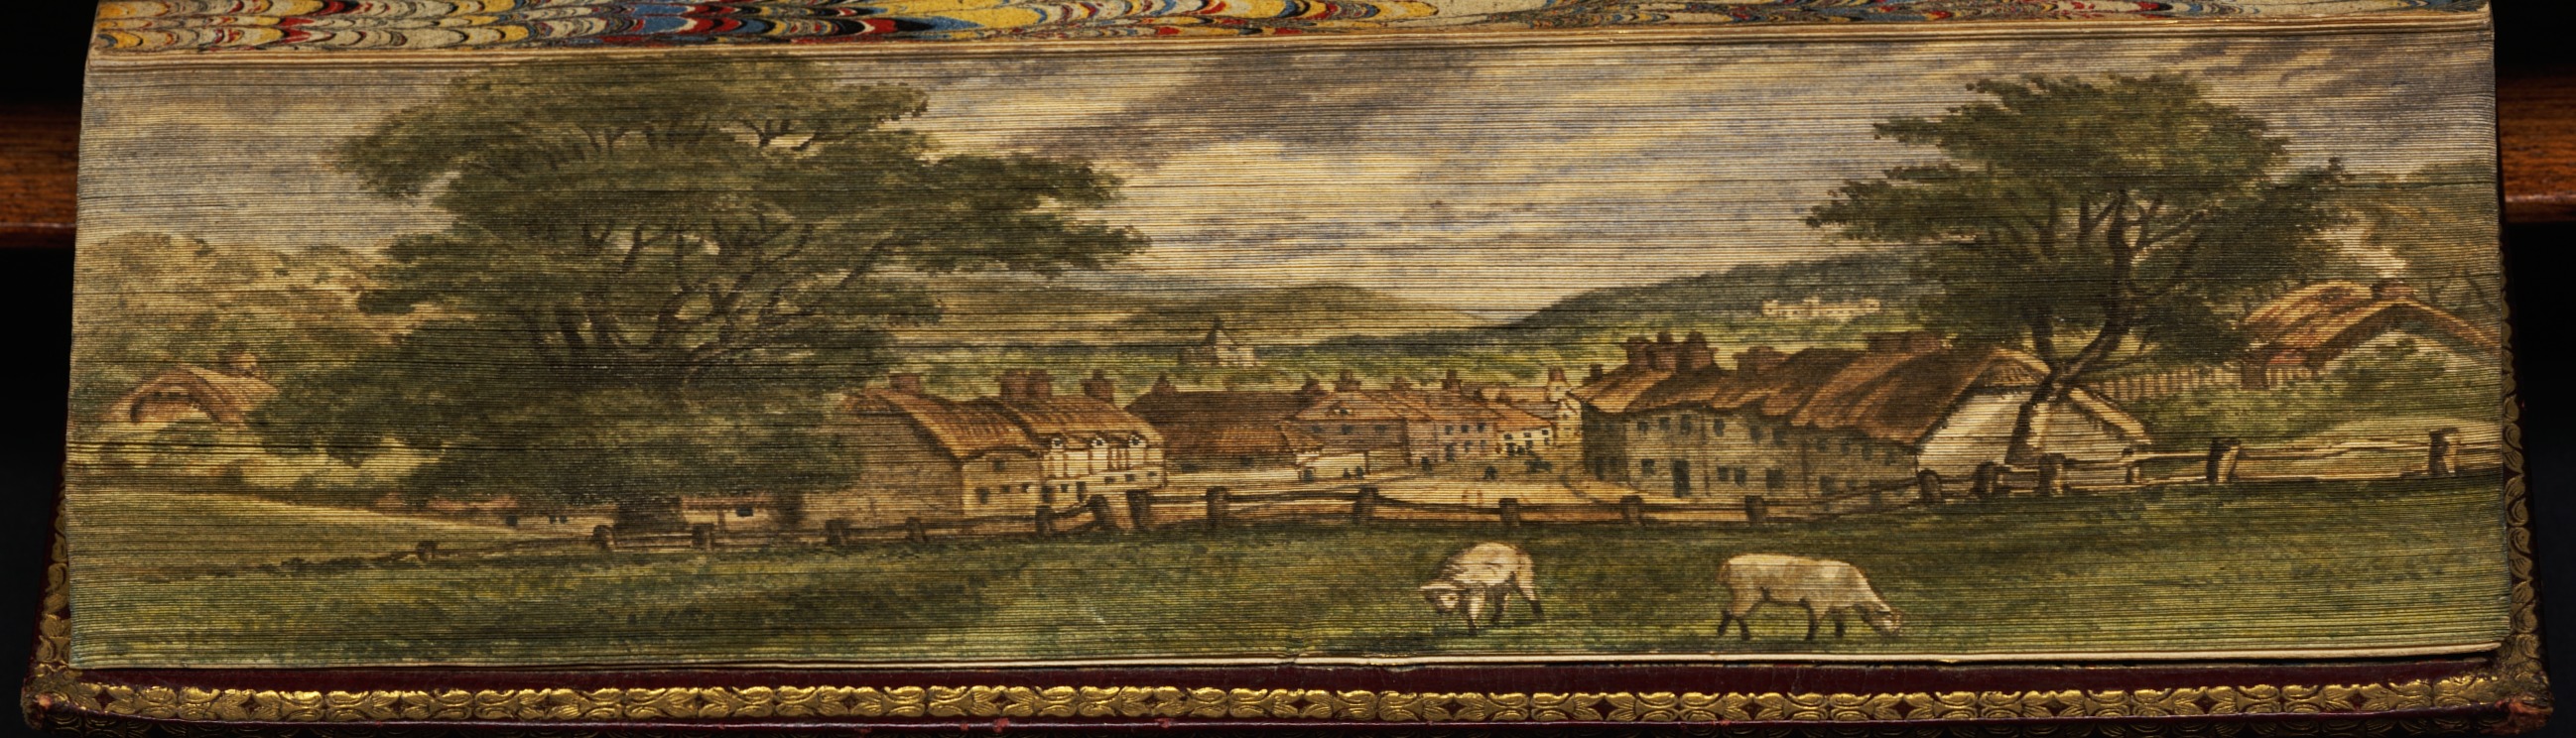 Winborne, Dorset, the birthplace of Matthew Prior, showing houses and cattle